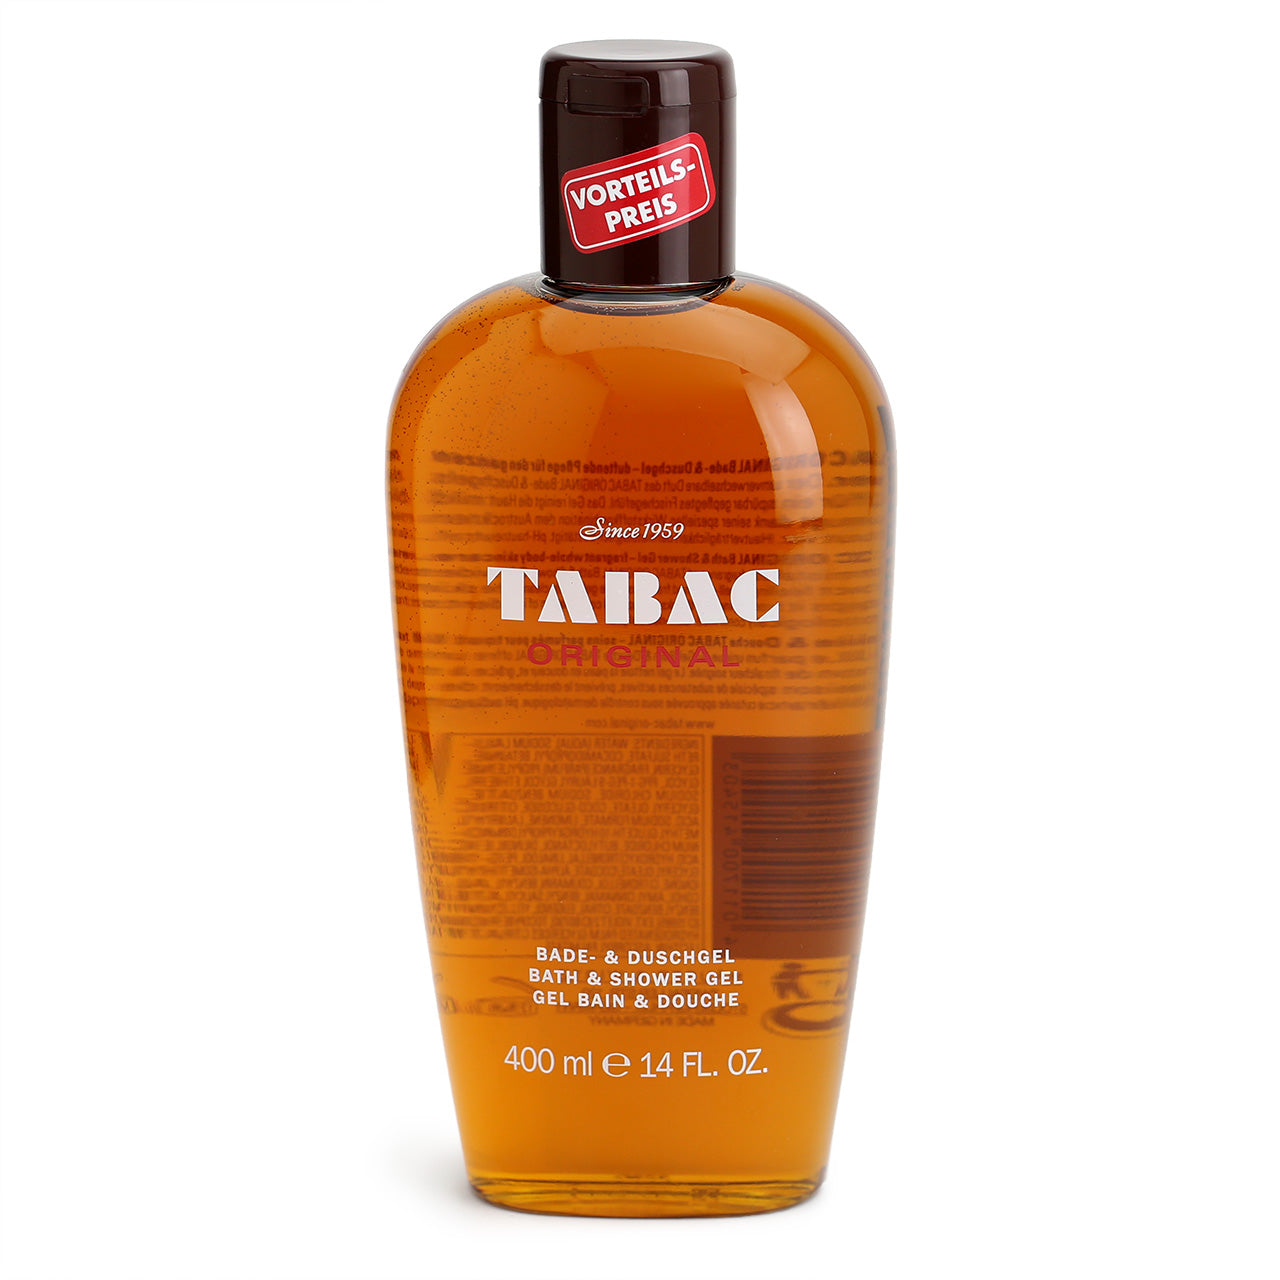 Amber coloured bath and shower Gel from Tabac Original in a 400ml plastic bottle 